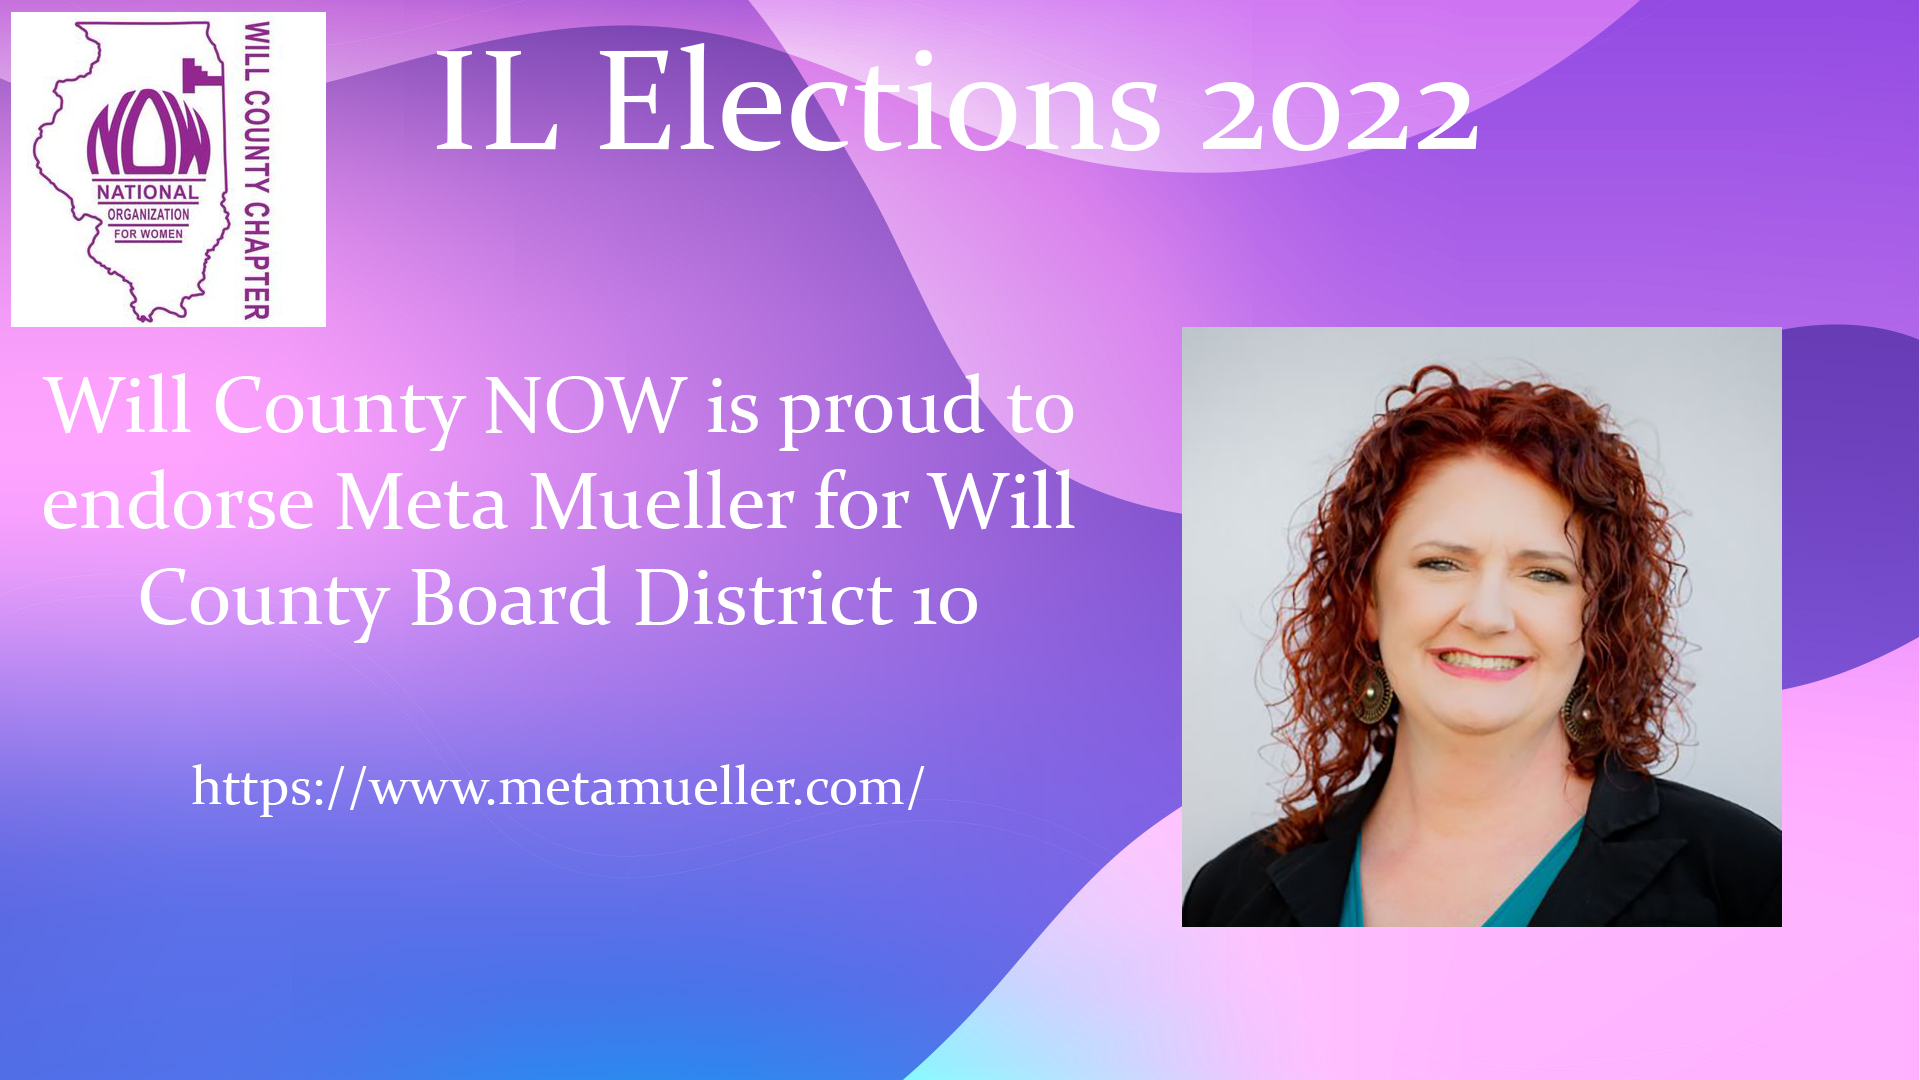 Will County NOW Endorses Meta Mueller for Will County Board District 10